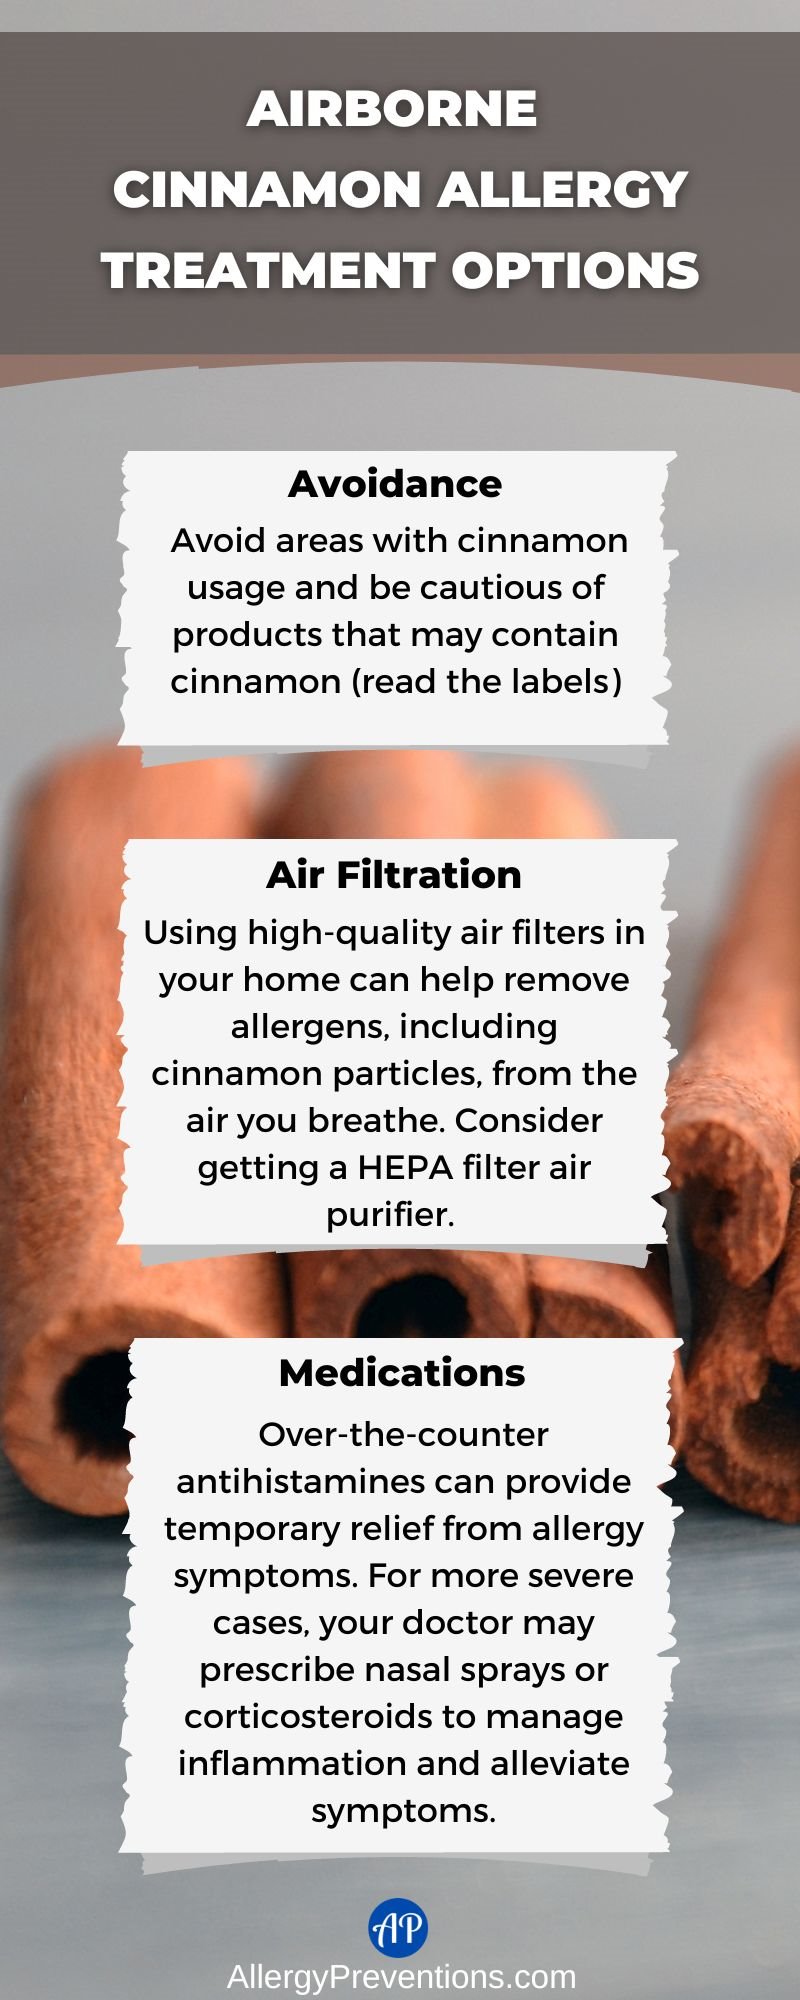 Airborne cinnamon allergy treatment options infographic: Avoidance, air filtration, and medications.